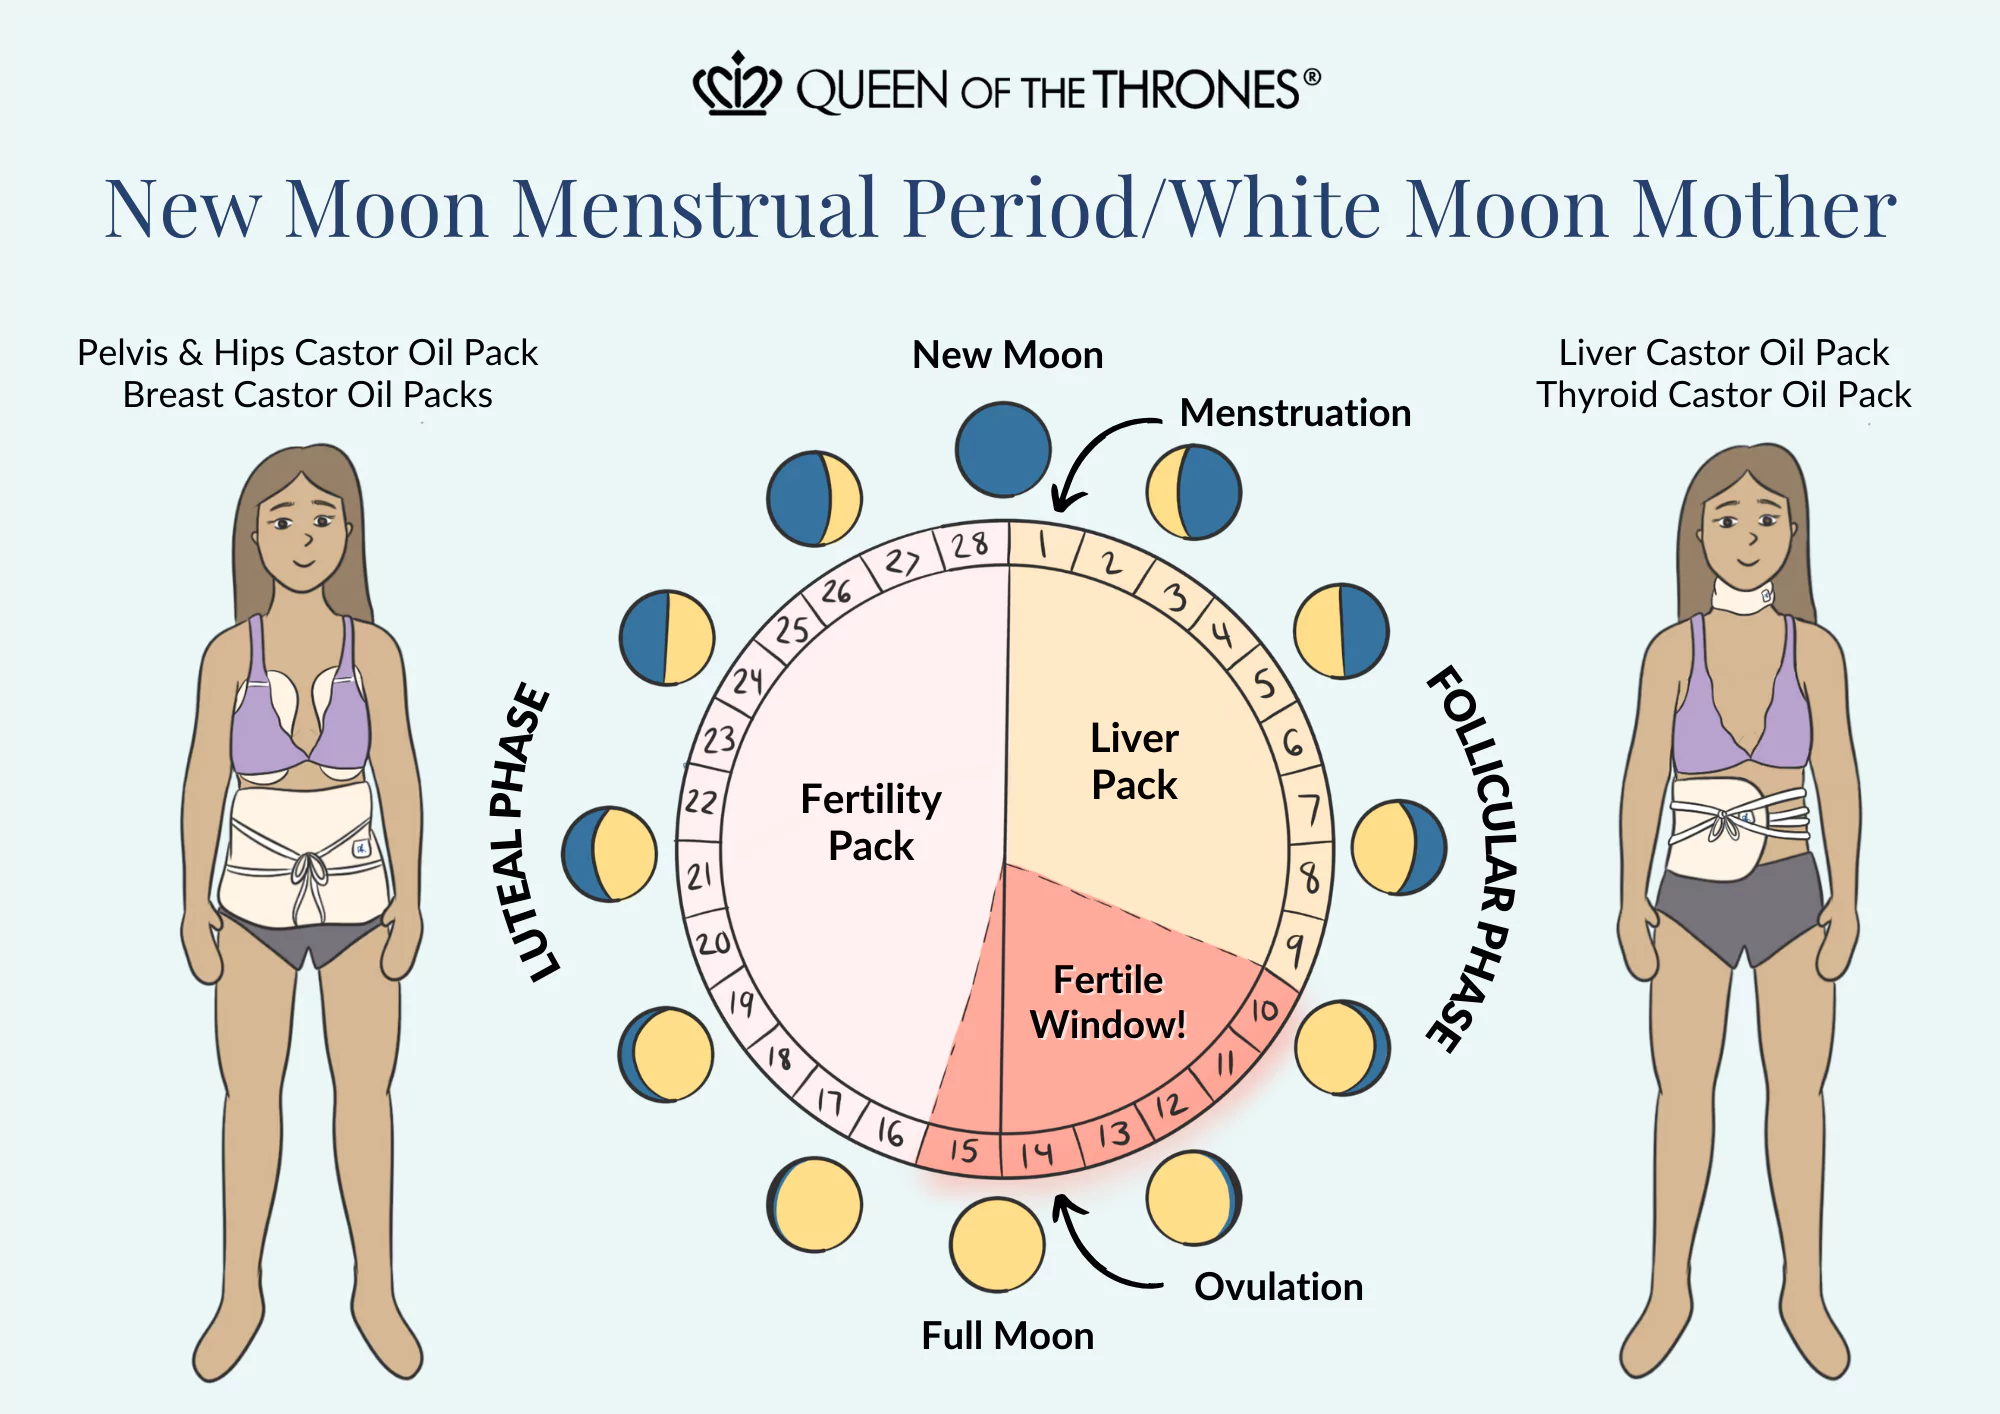 Queen of the Thrones new moon whit menstruation cycle